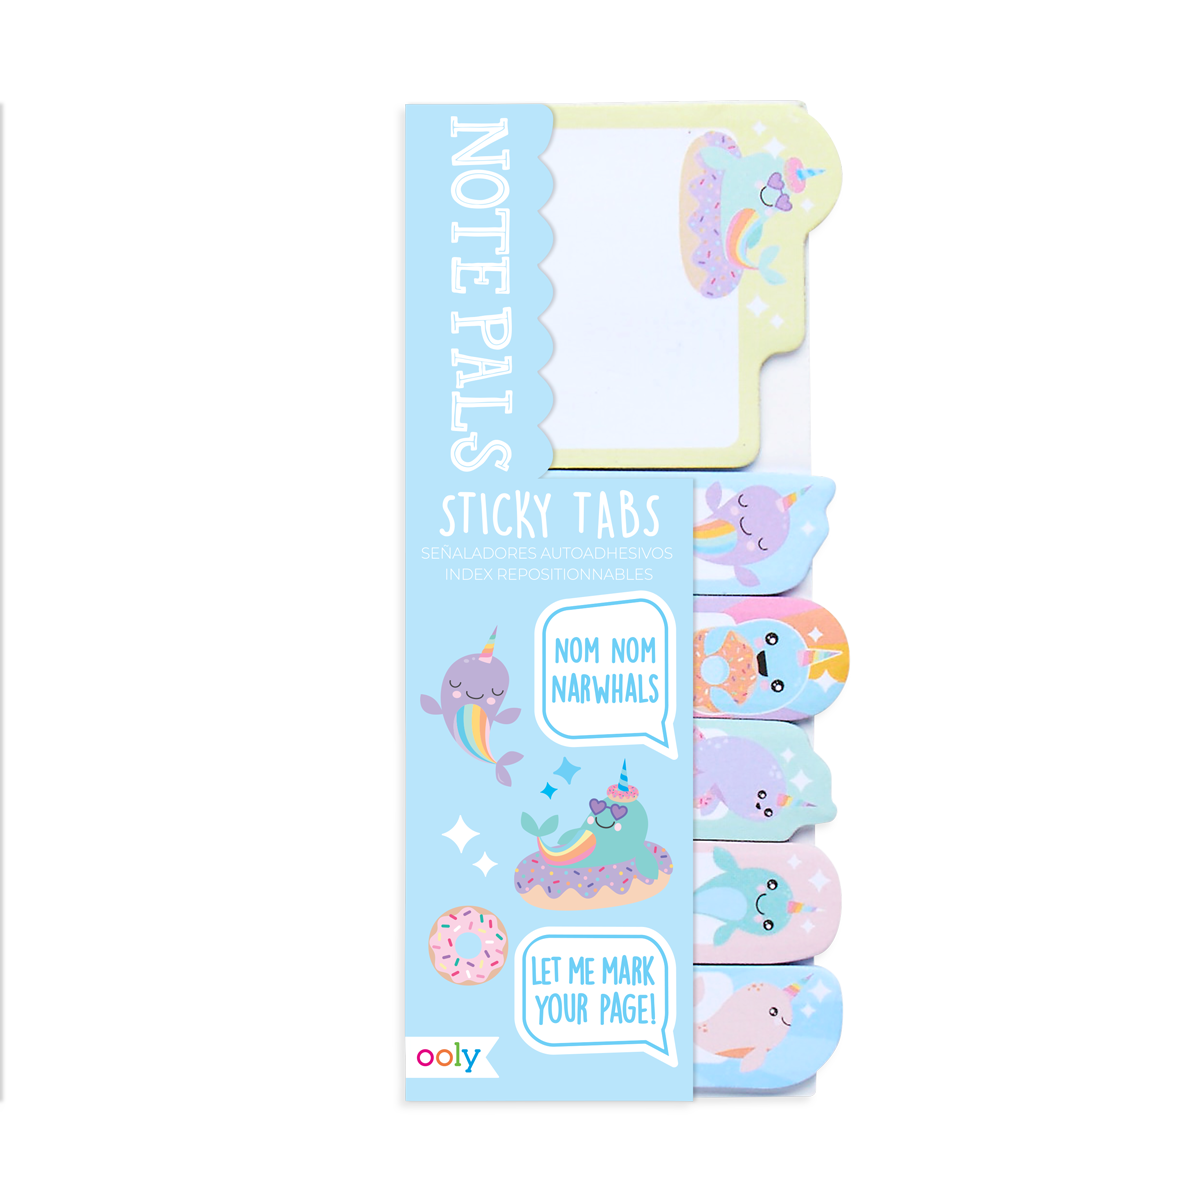 OOLY Note Pals Sticky Tabs - Nom Nom Narwhals in packaging